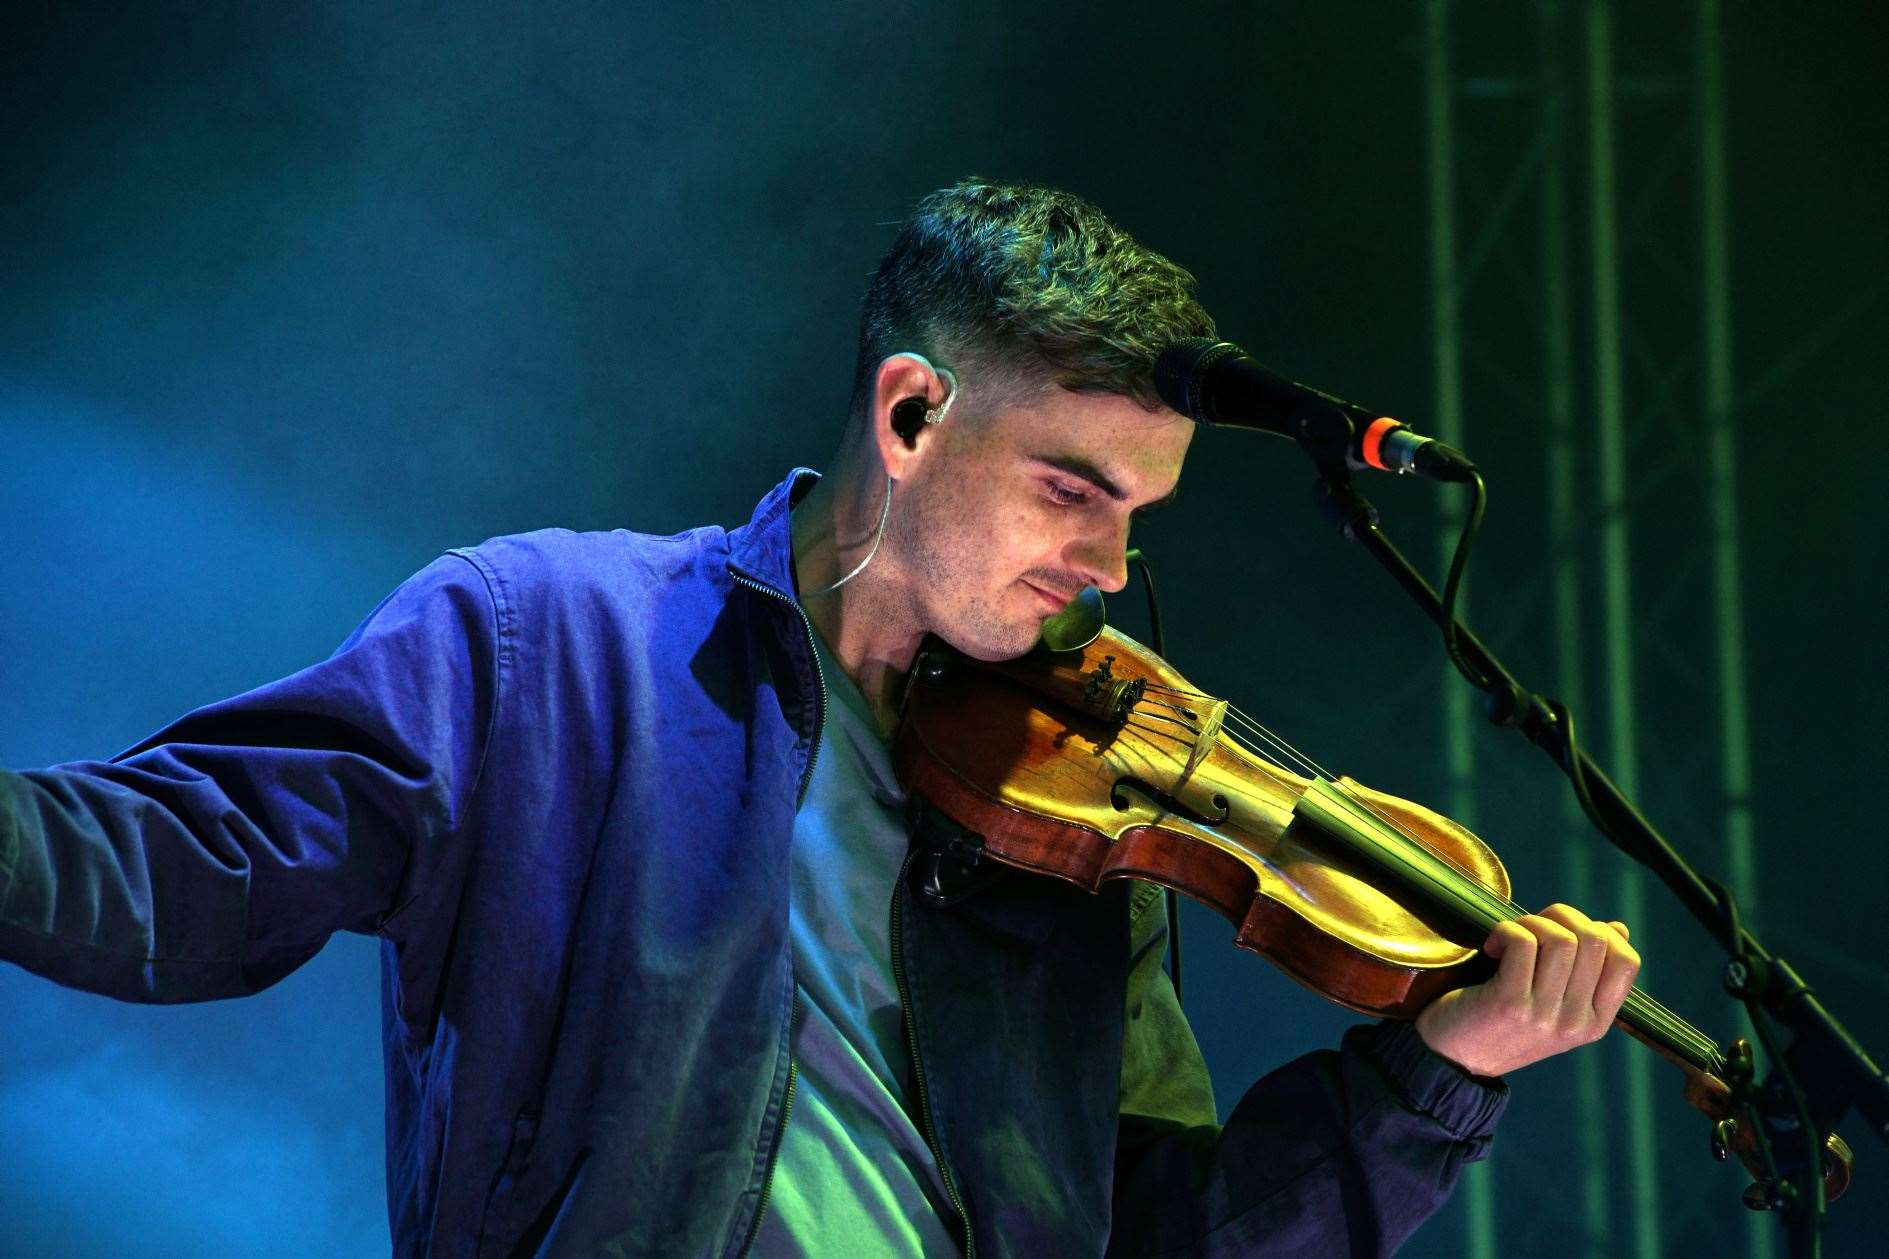 Elephant Sessions' fiddle player Euan Smillie headlining with the band at The Gathering Festival. Elephant Sessions on stage. Picture: James Mackenzie